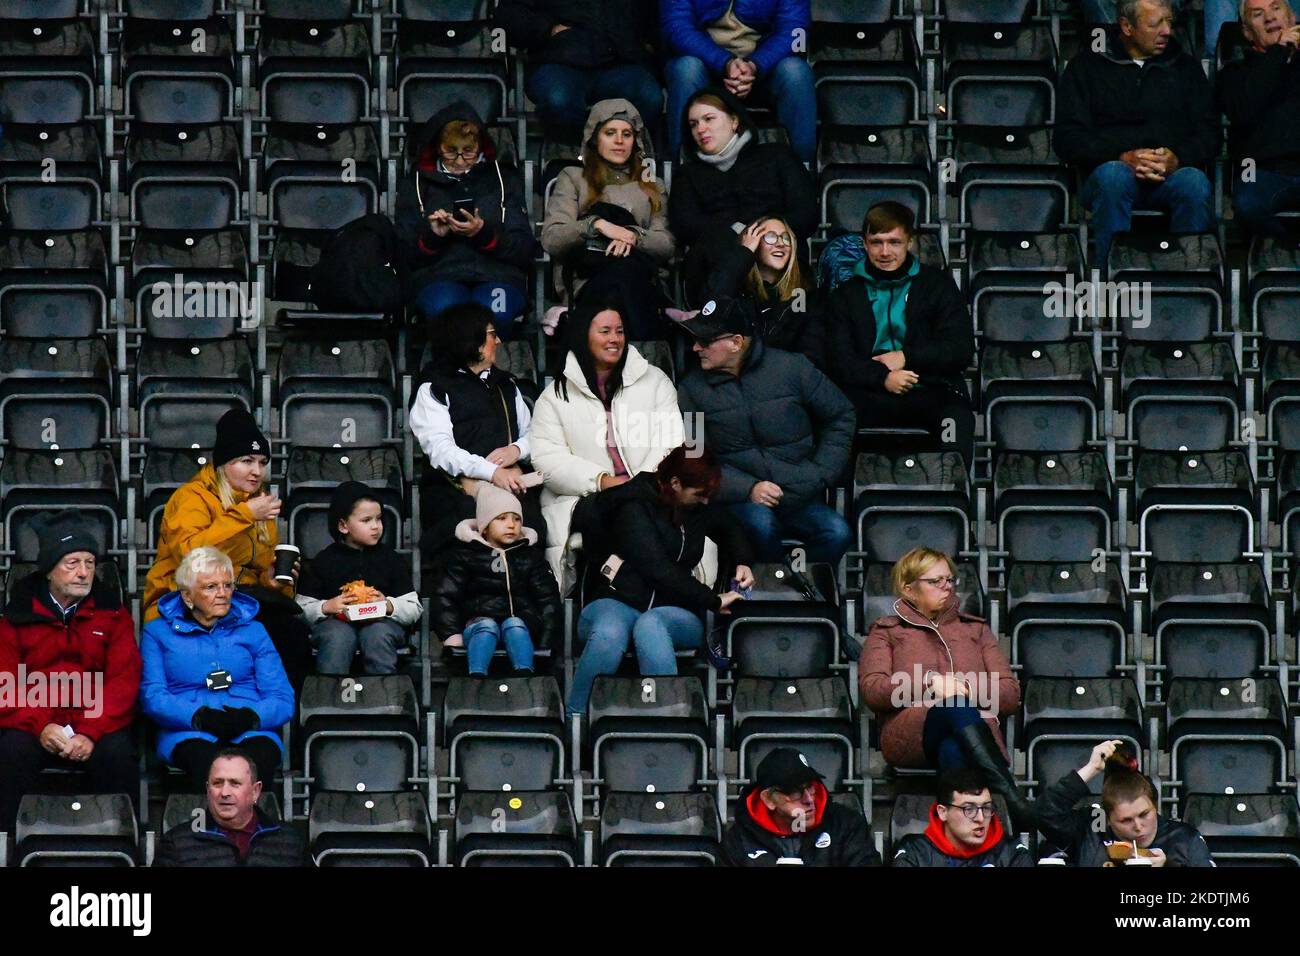 Swansea, Wales. 8 November 2022. Some of the spectators during the Professional Development League game between Swansea City Under 21 and Queens Park Rangers Under 21 at the Swansea.com Stadium in Swansea, Wales, UK on 8 November 2022. Credit: Duncan Thomas/Majestic Media/Alamy Live News. Stock Photo